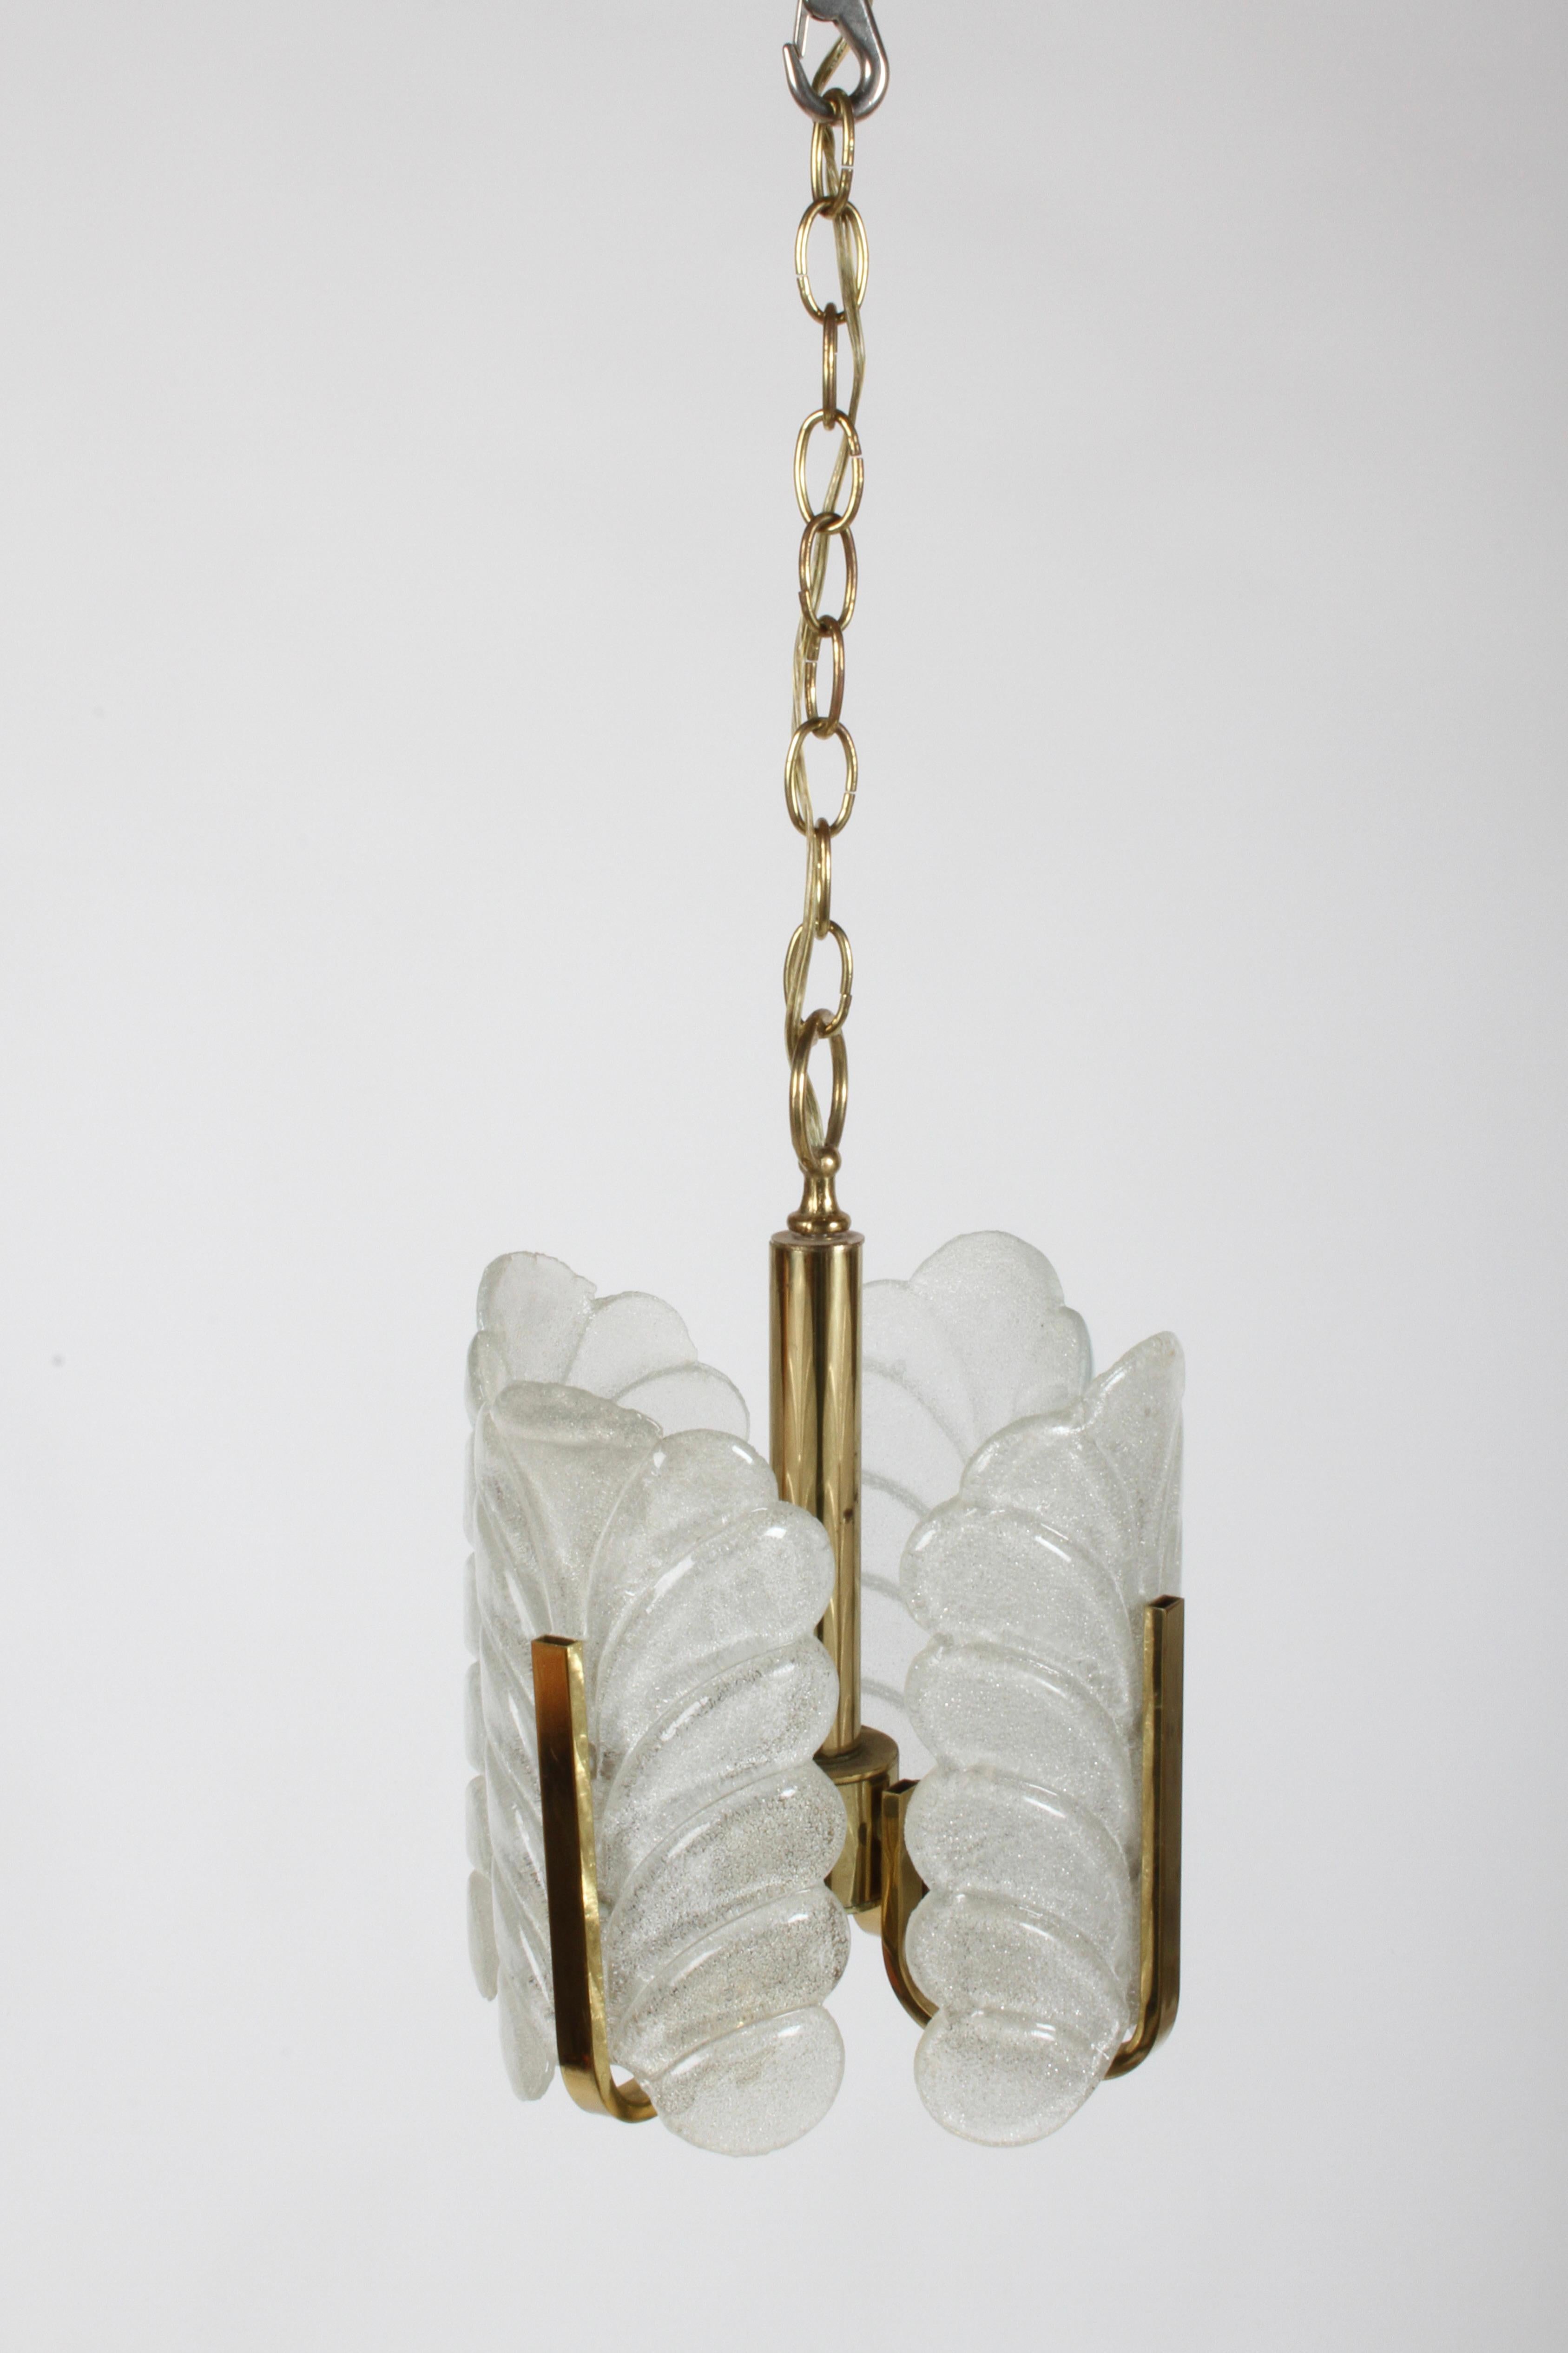 Mid-Century Modern Carl Fagerlund Chandelier for Orrefors Sweden Textured Acanthus Glass Leaves  For Sale